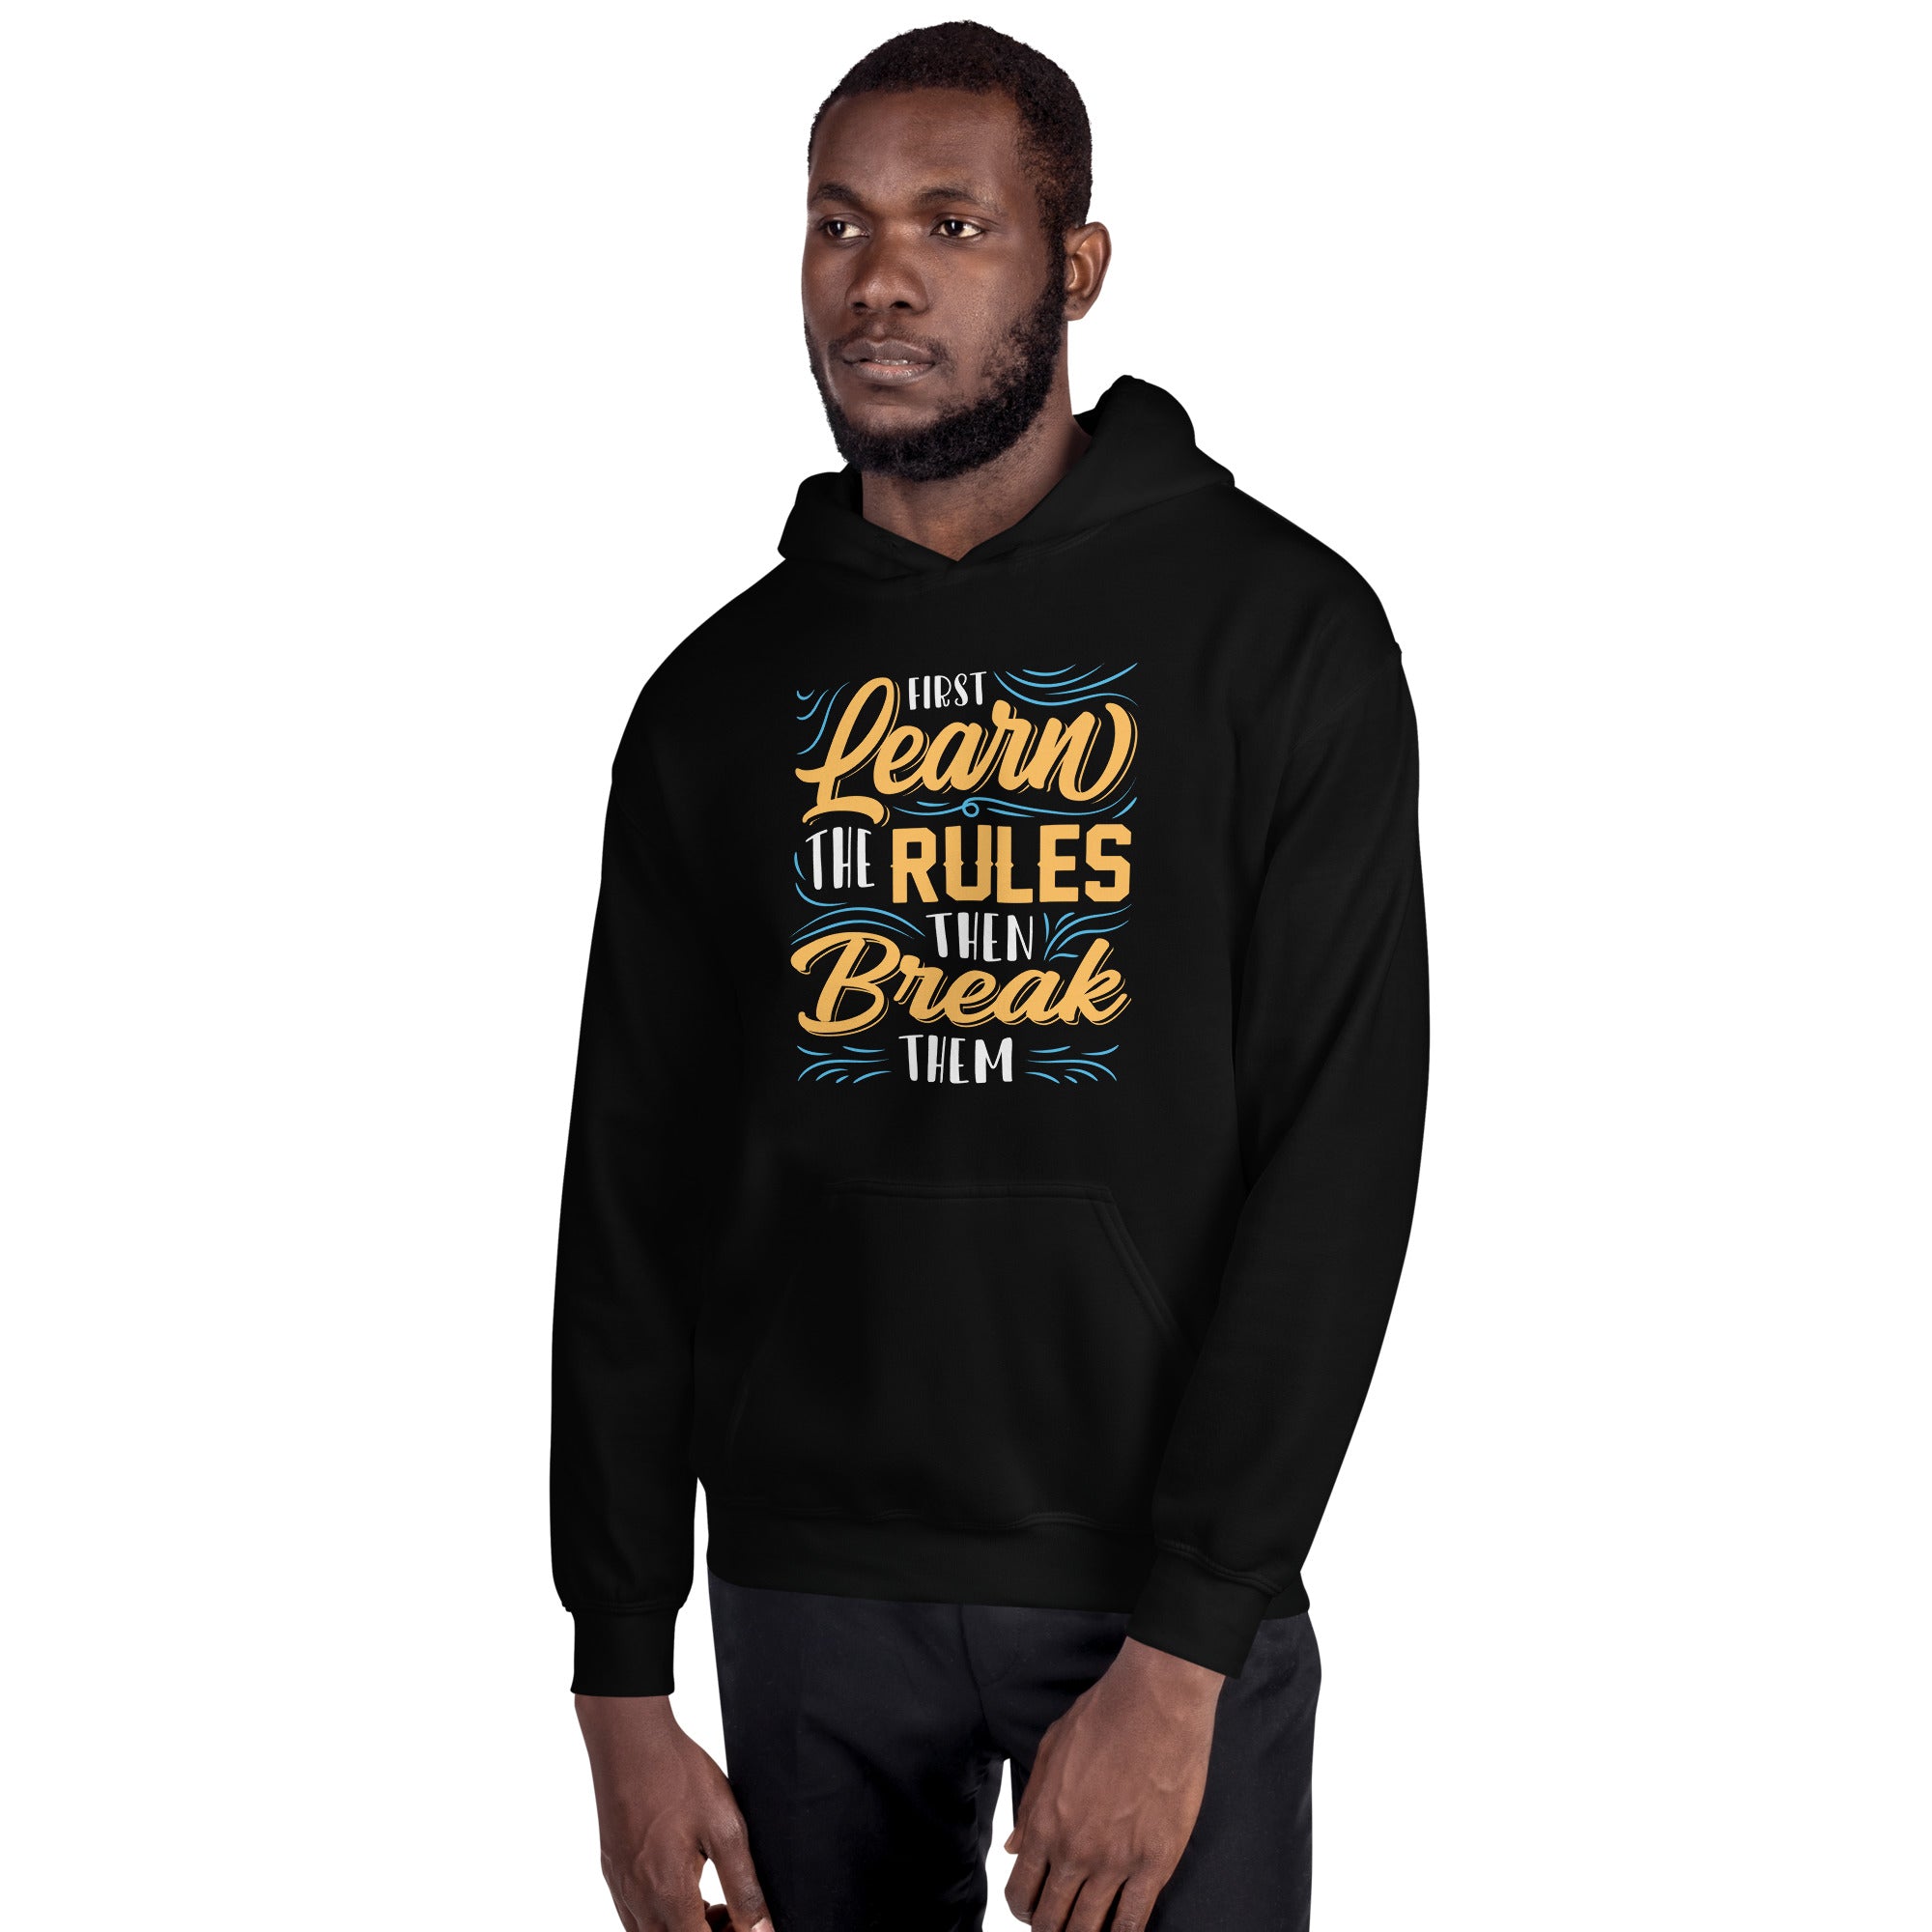 First Learn the Rules & Then Break Them - Unisex Hoodie